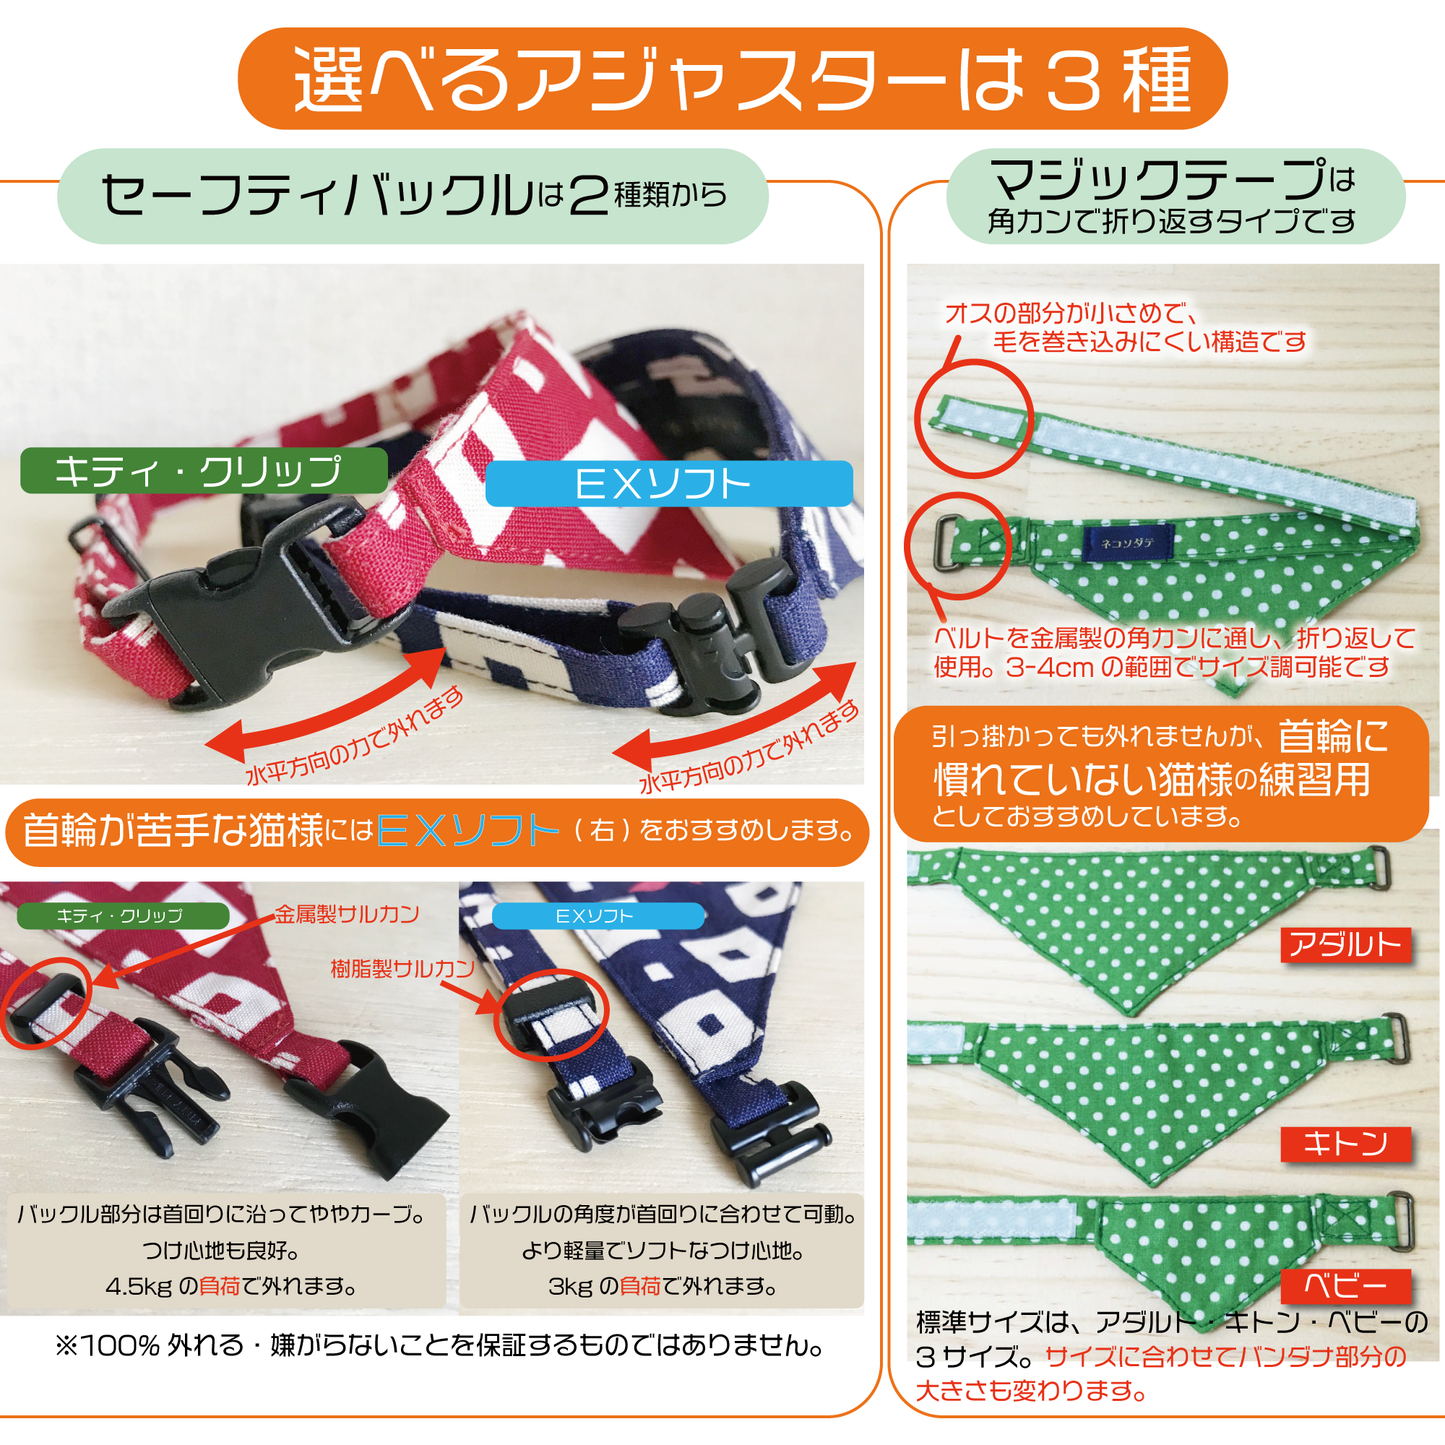 [Ghost dot pattern] Serious collar, conspicuous bandana style / selectable adjuster cat collar